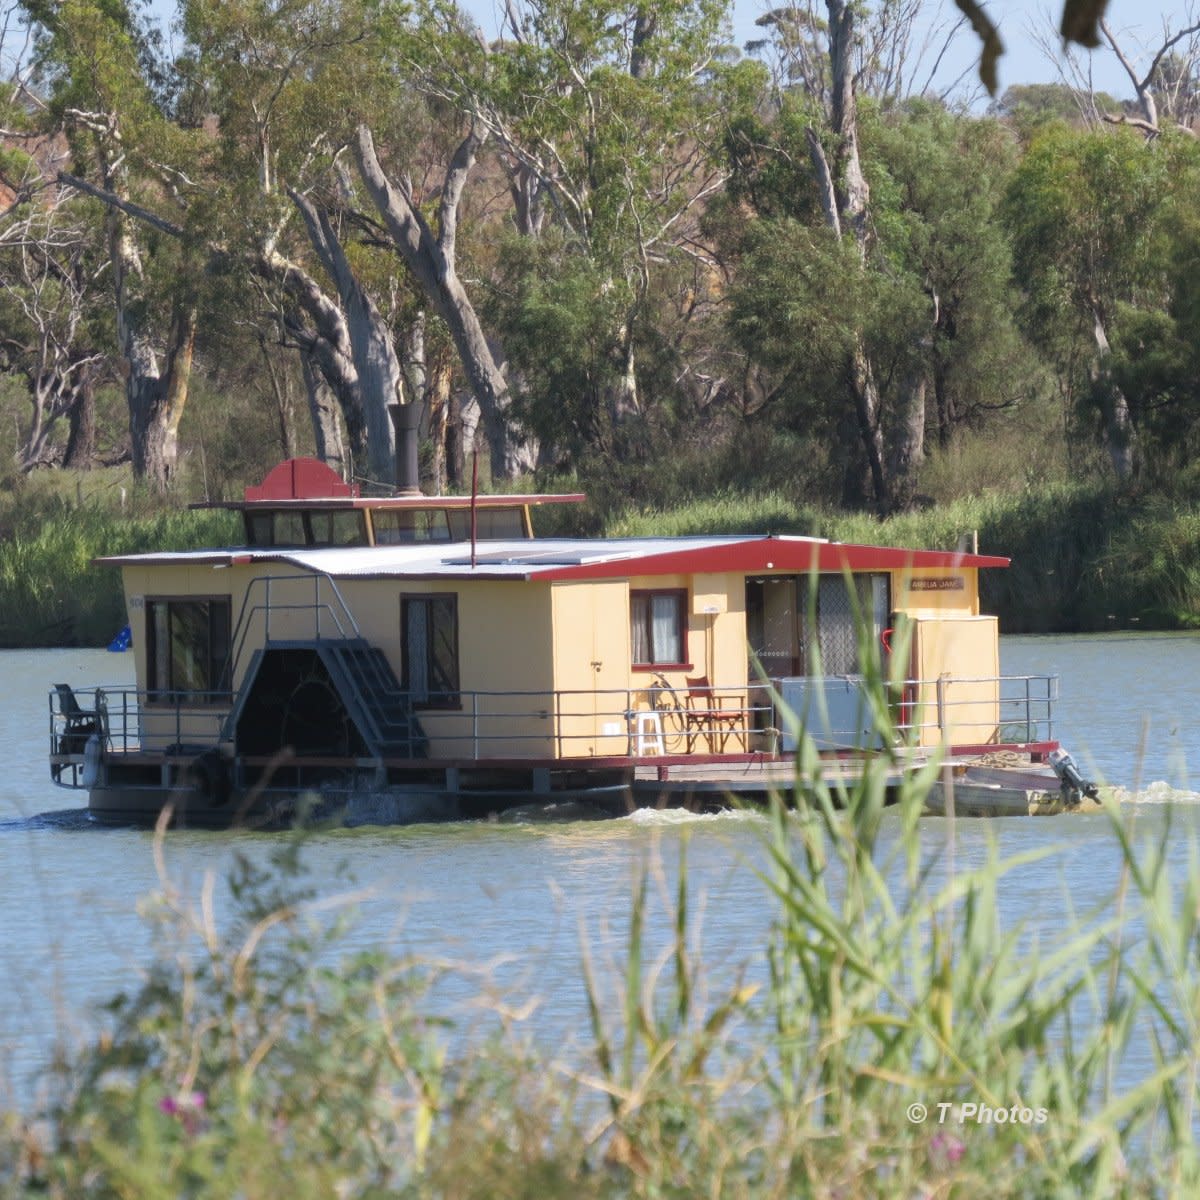 History of the Paddle Steamers and Houseboats on Australia’s Murray River